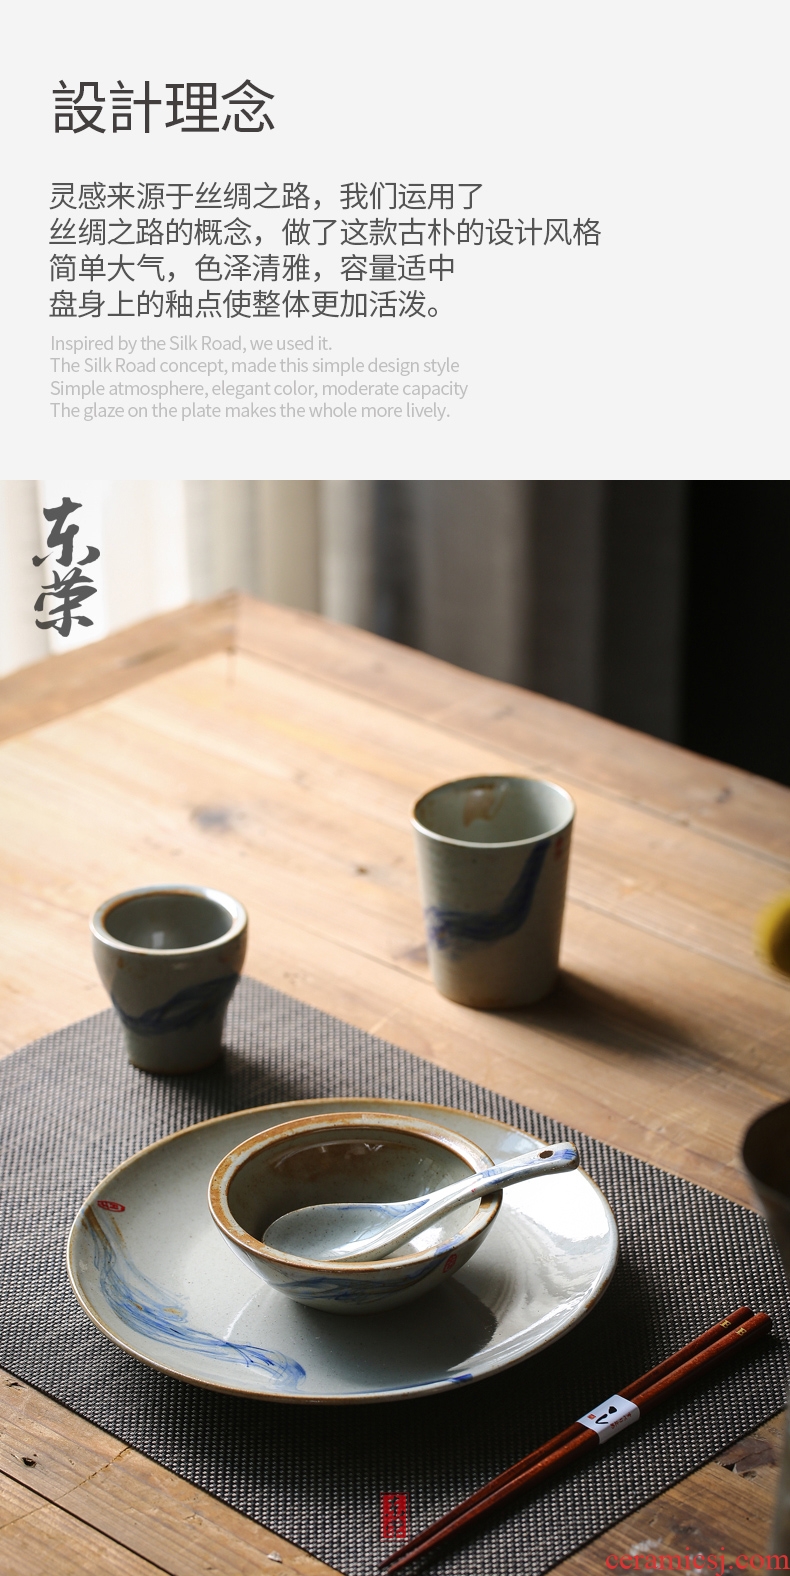 One Japanese food ceramic tableware suit. Also hotel restaurant dishes teaspoons of glass plate hotel supplies